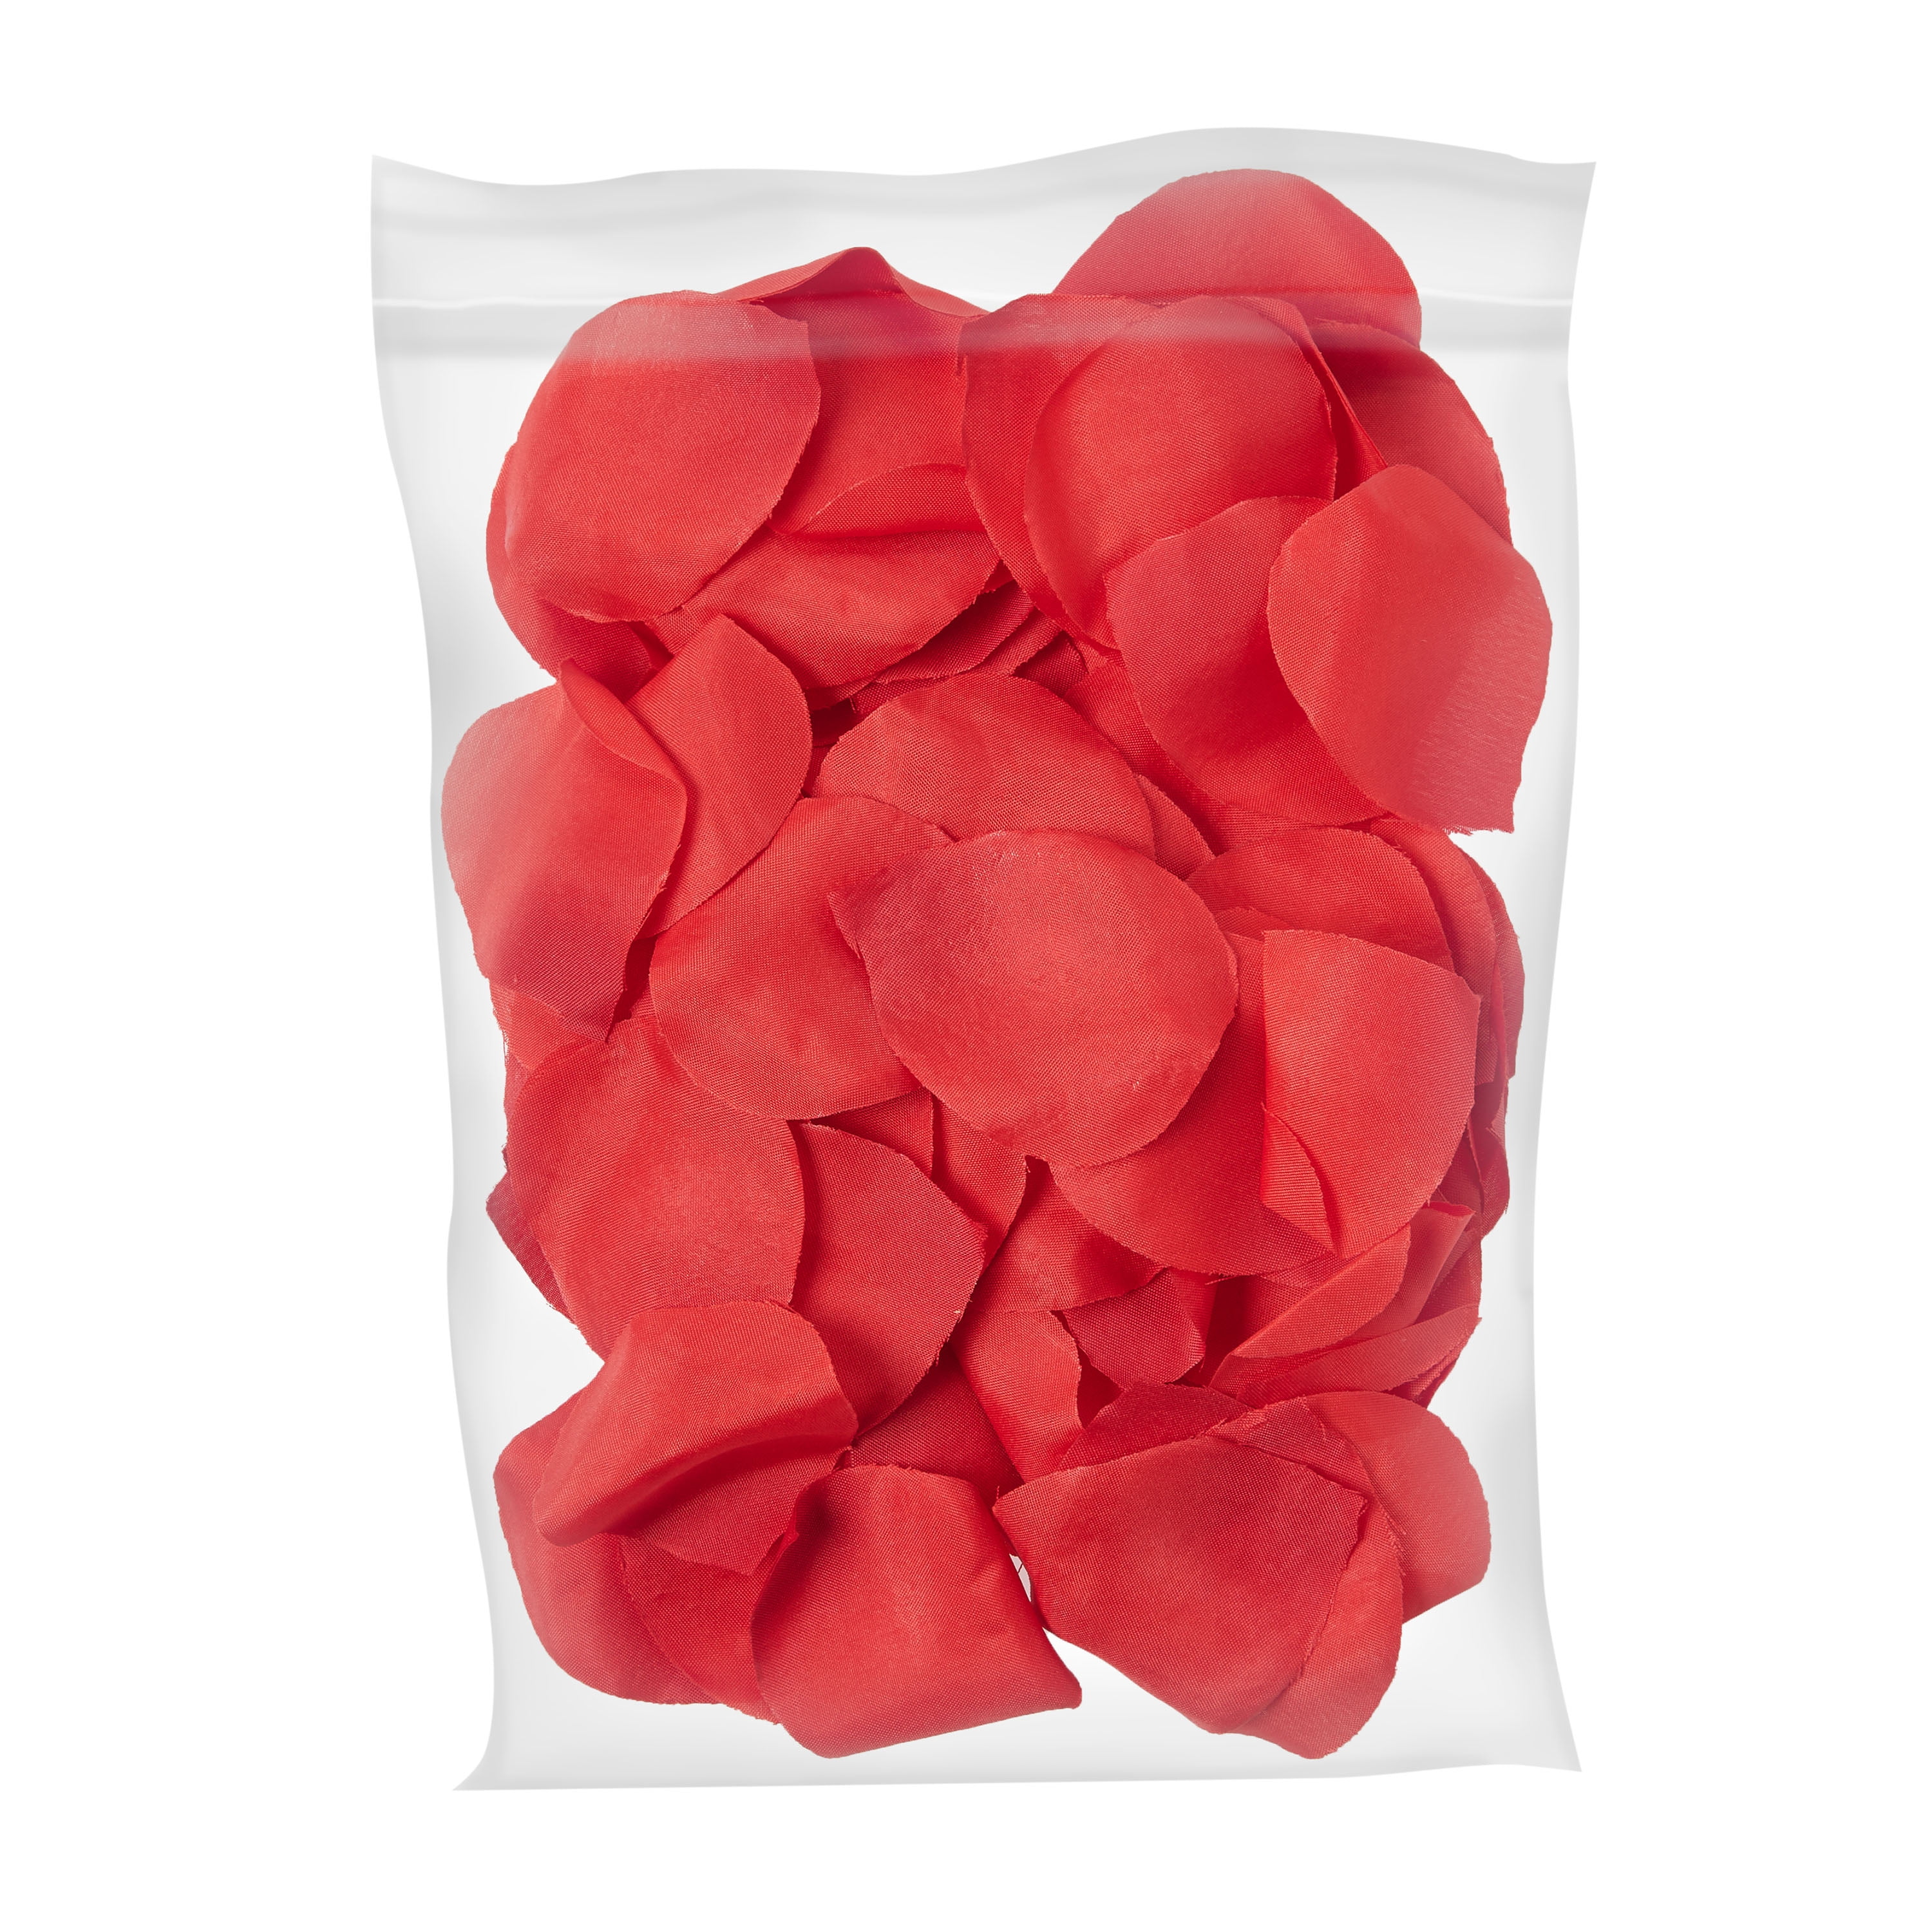 Dried Confetti Petals Valentines Day Red Rose Petals 